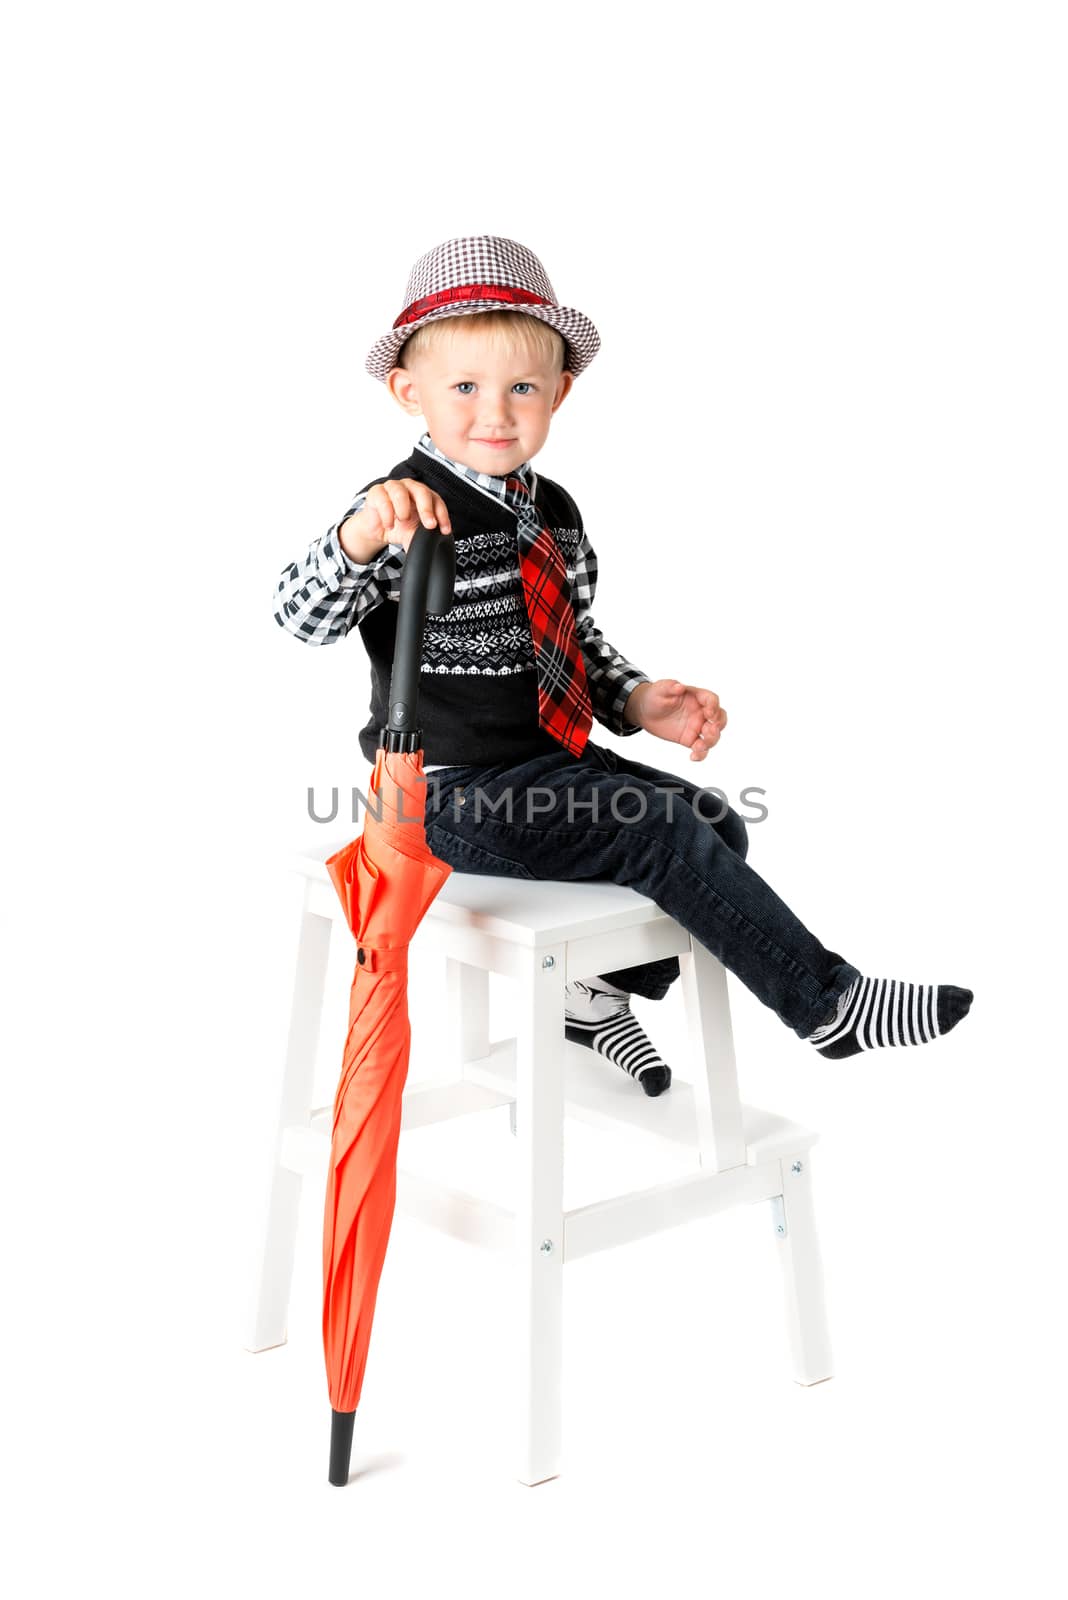 Smiling happy boy with umbrella shot in the studio on a white background